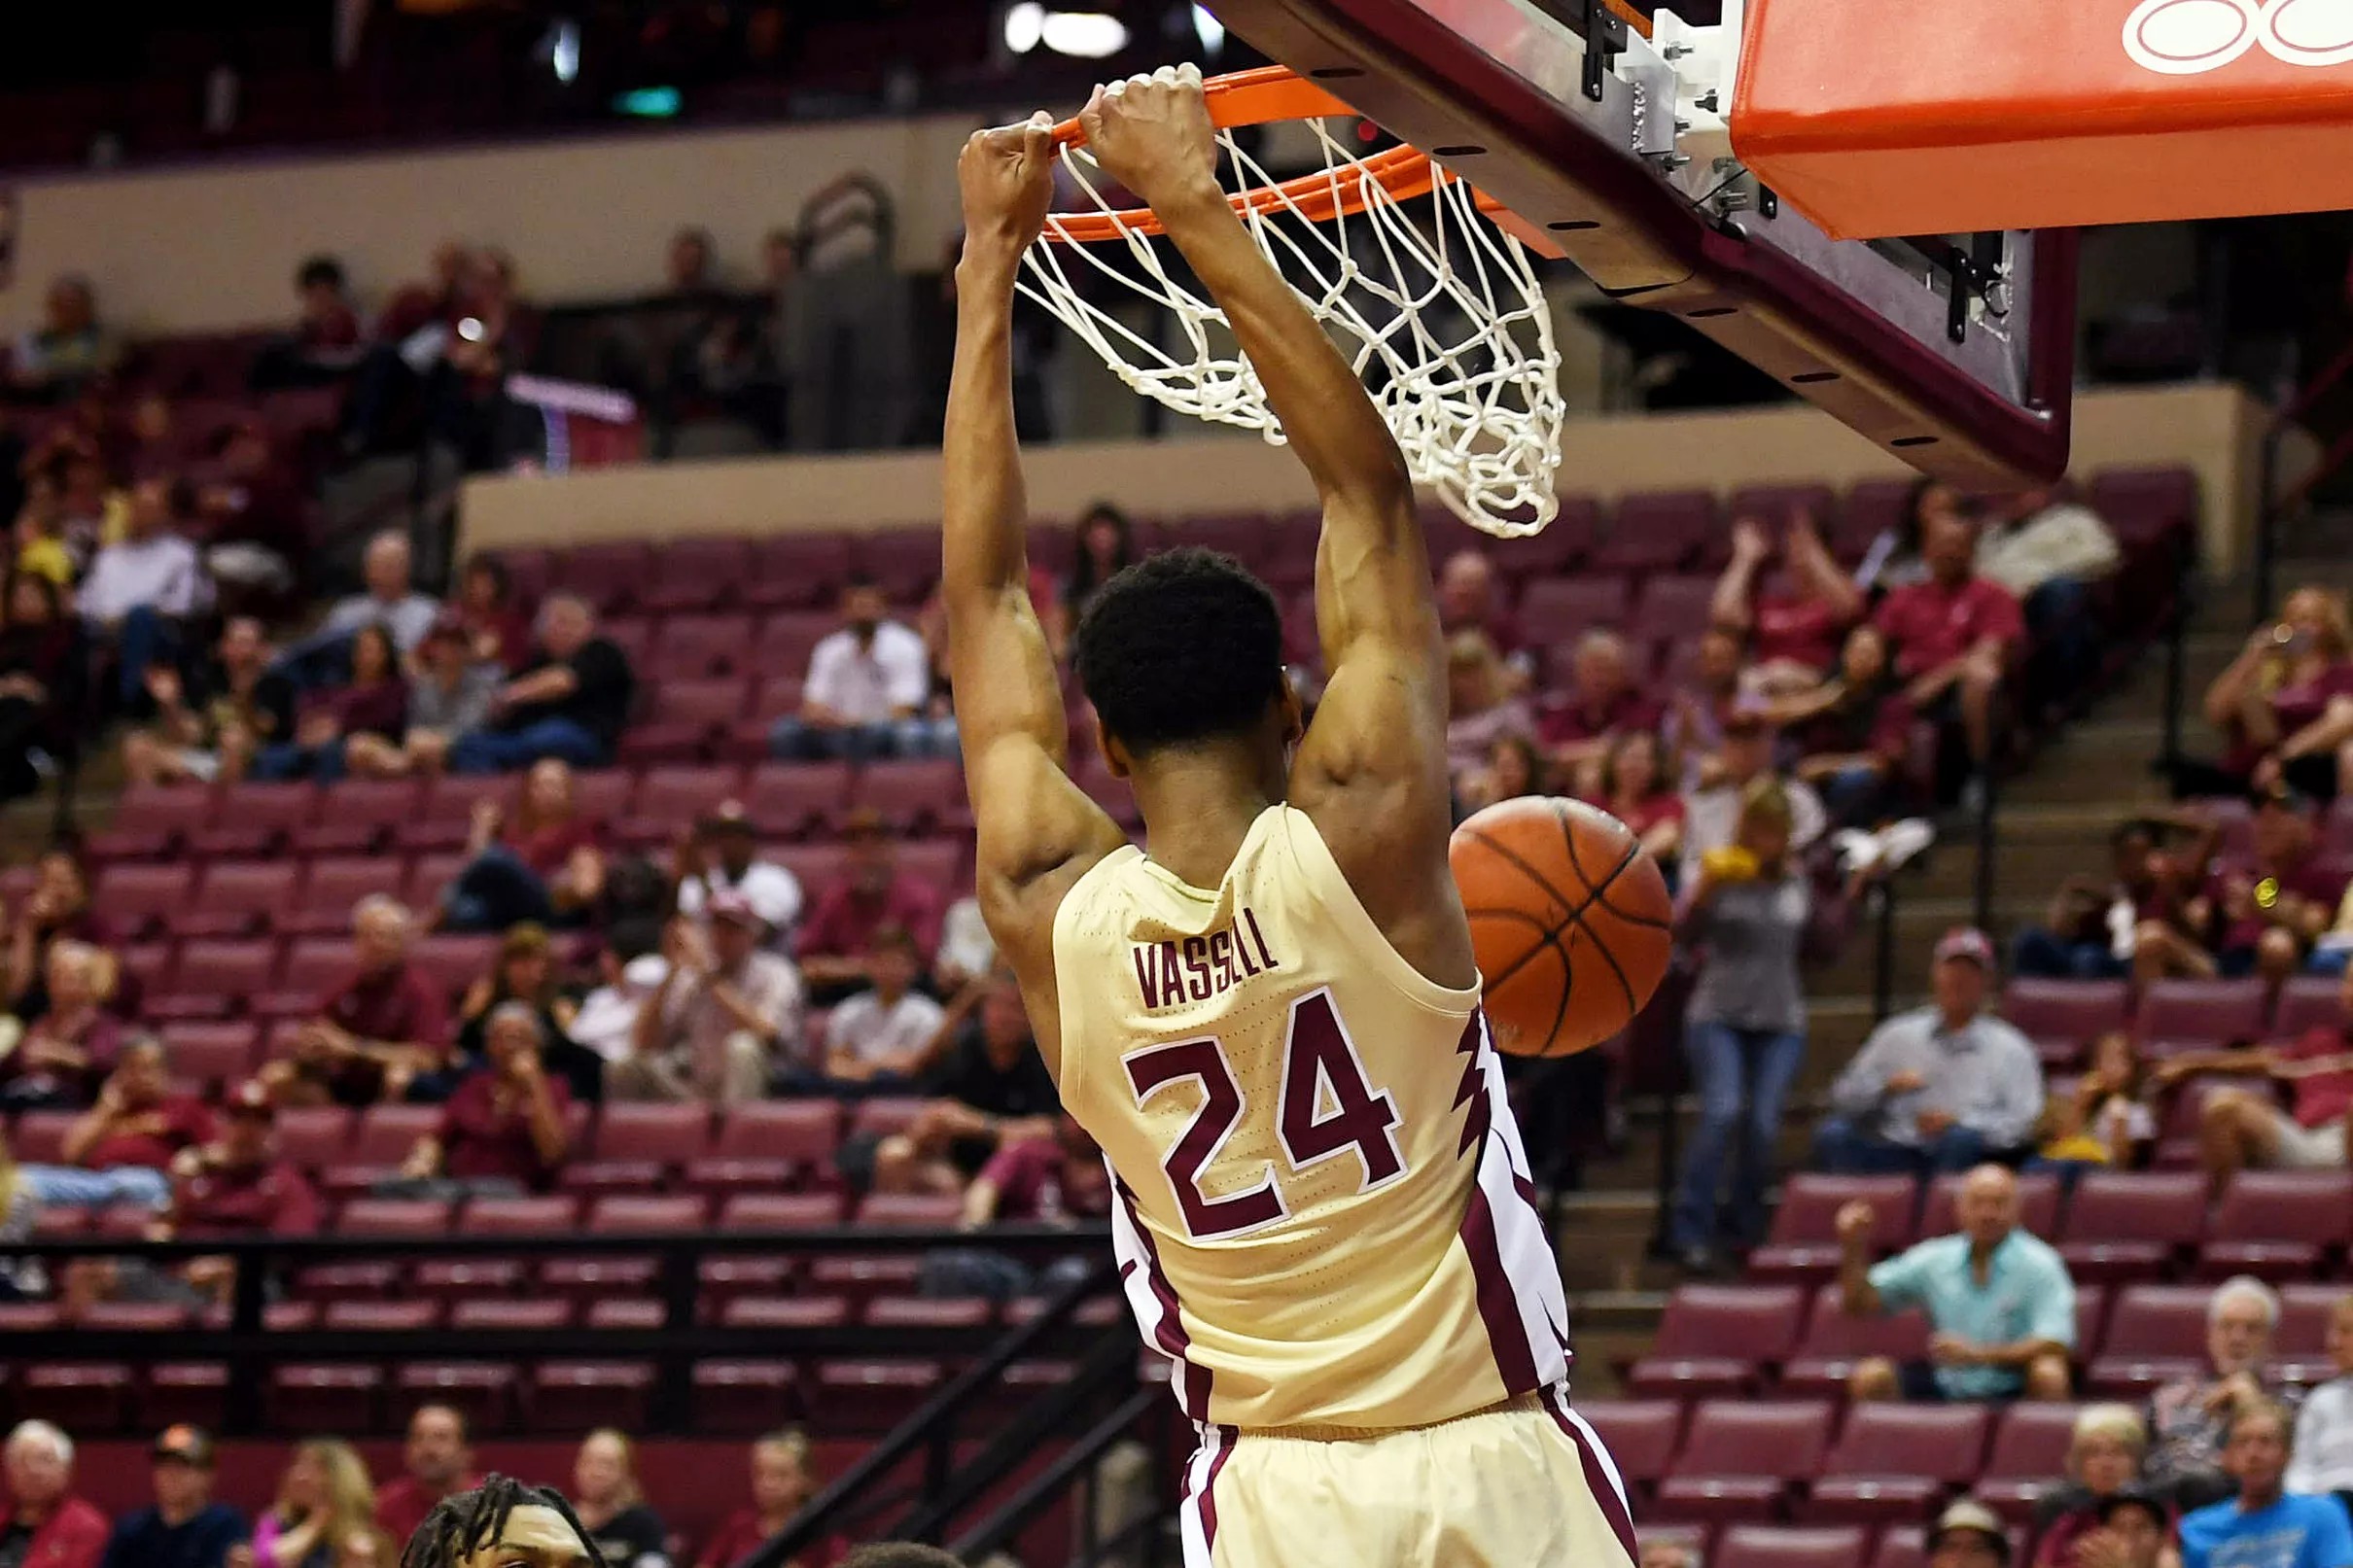 FSU basketball outlasts Winthrop, closes OOC schedule with a 12-1 record